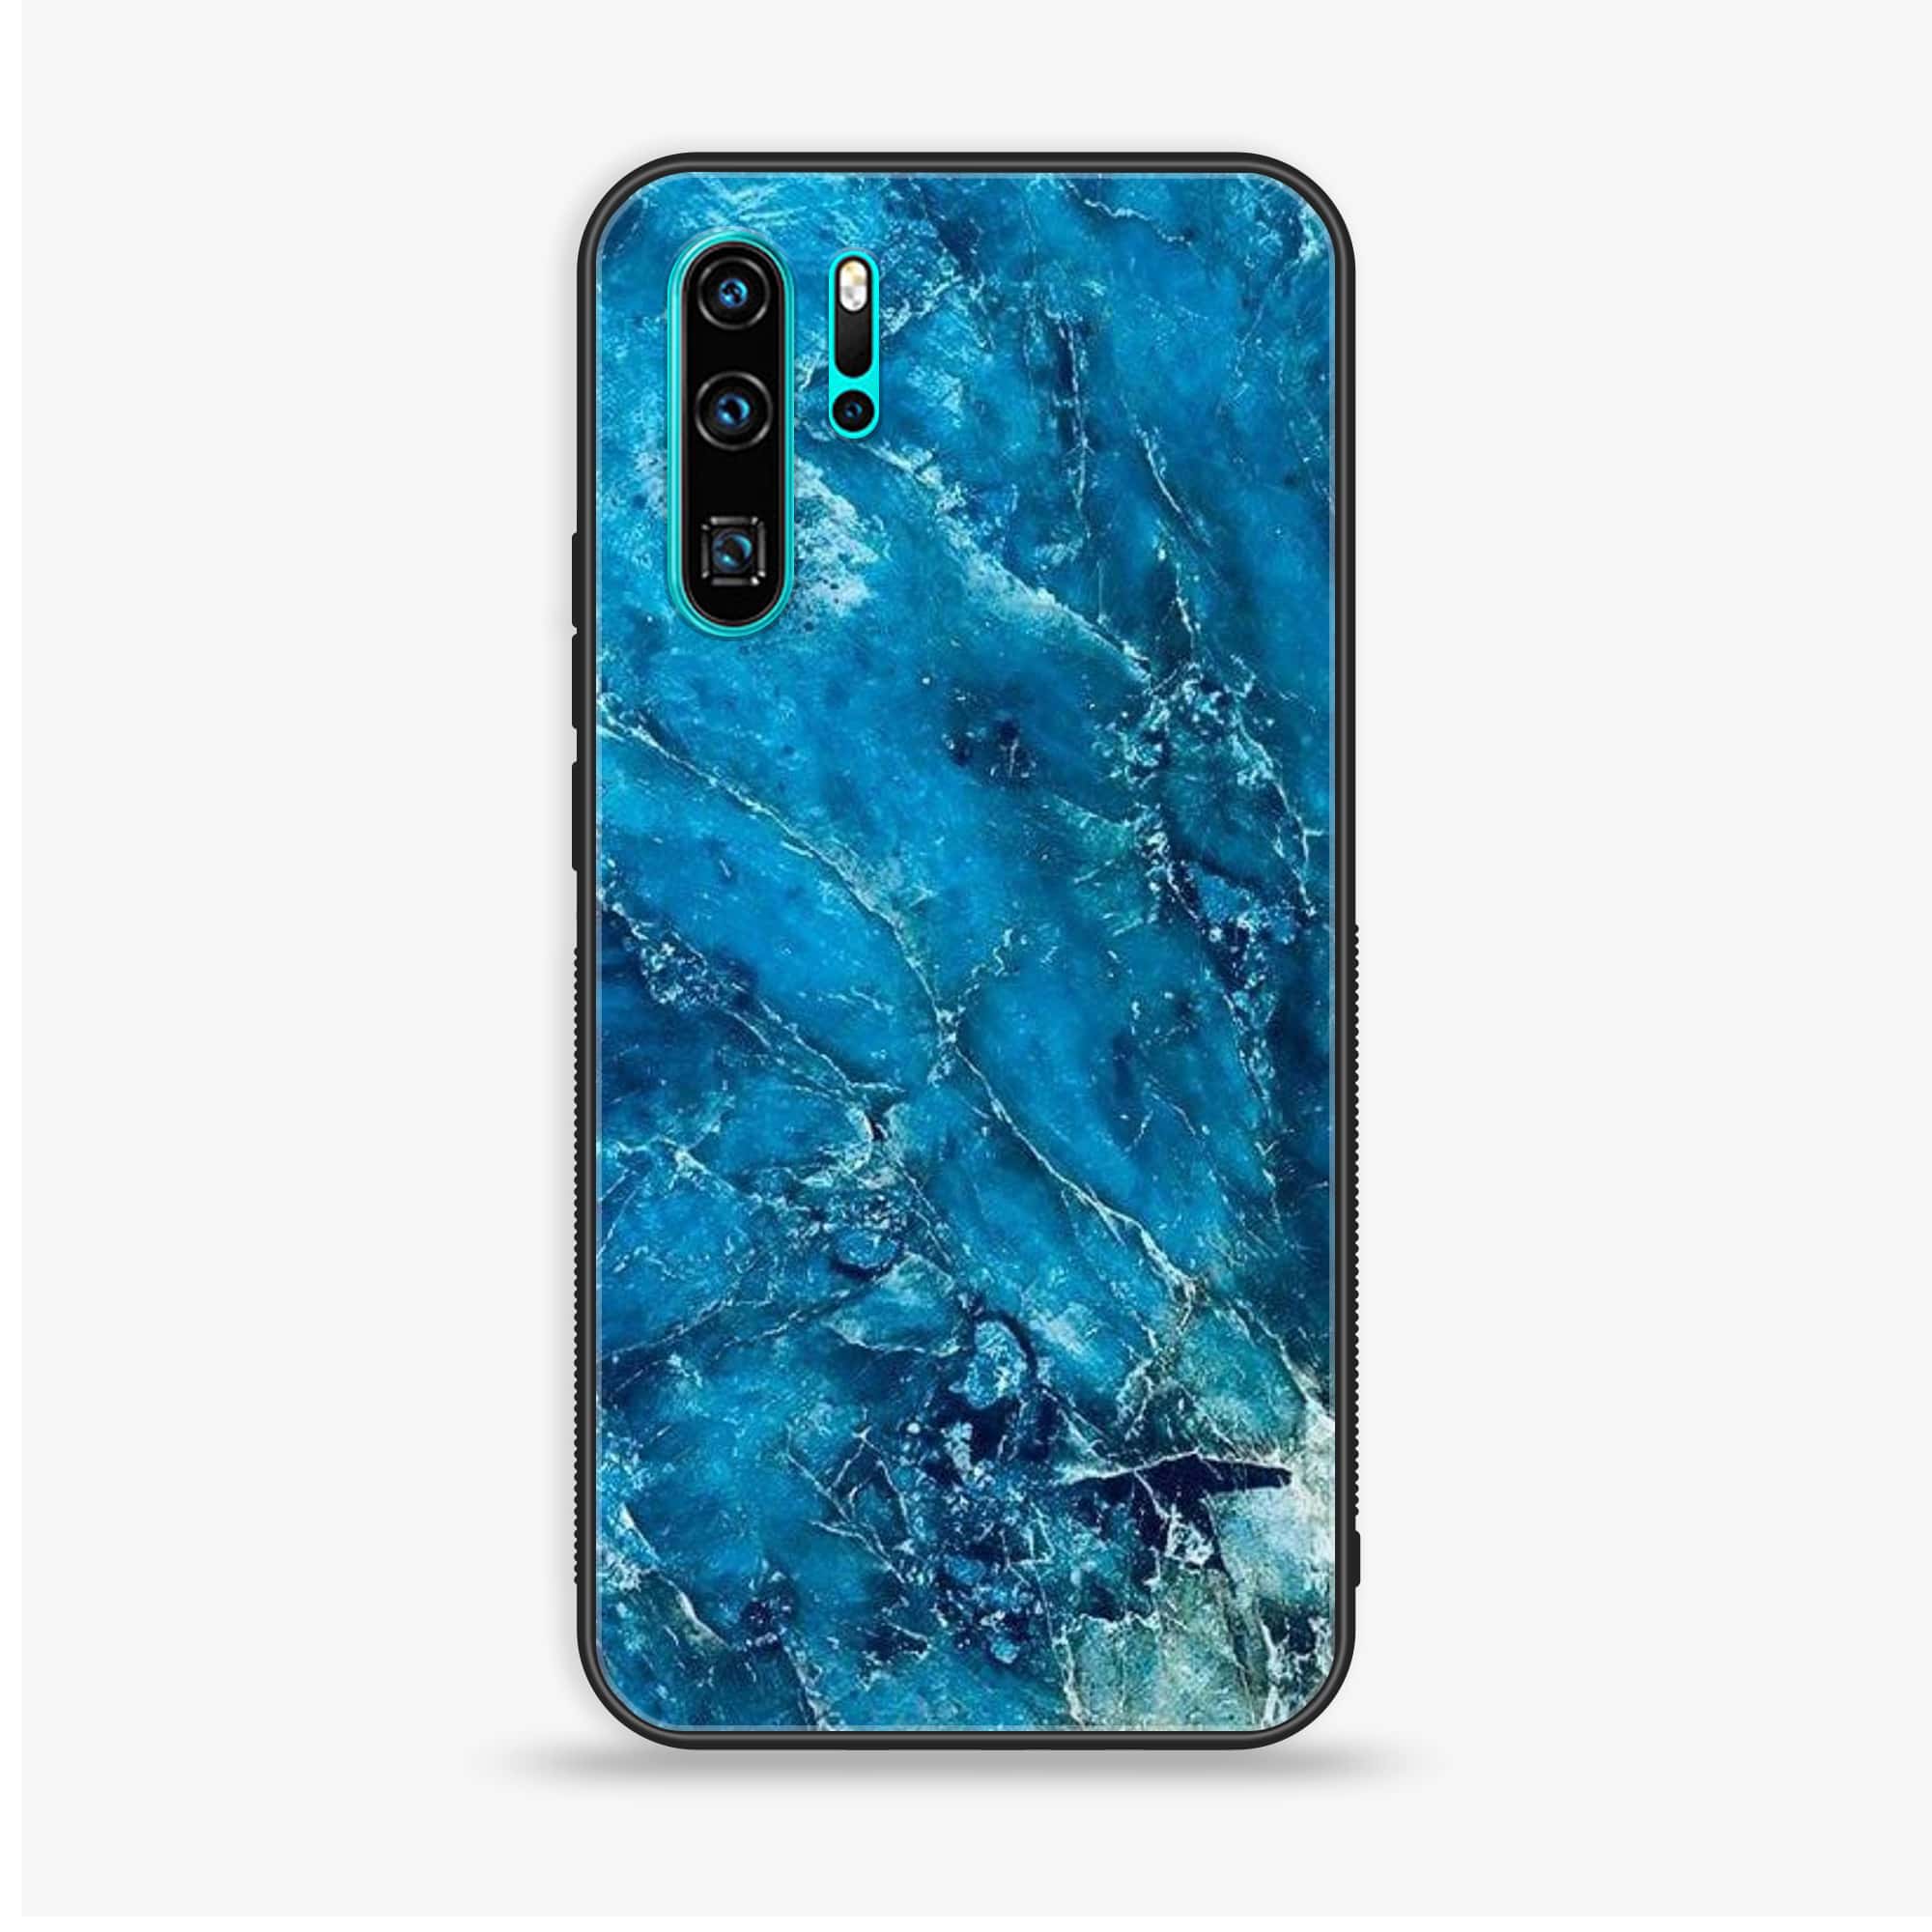 Huawei P30 Pro - Blue Marble 2.0 Series - Premium Printed Glass soft Bumper shock Proof Case